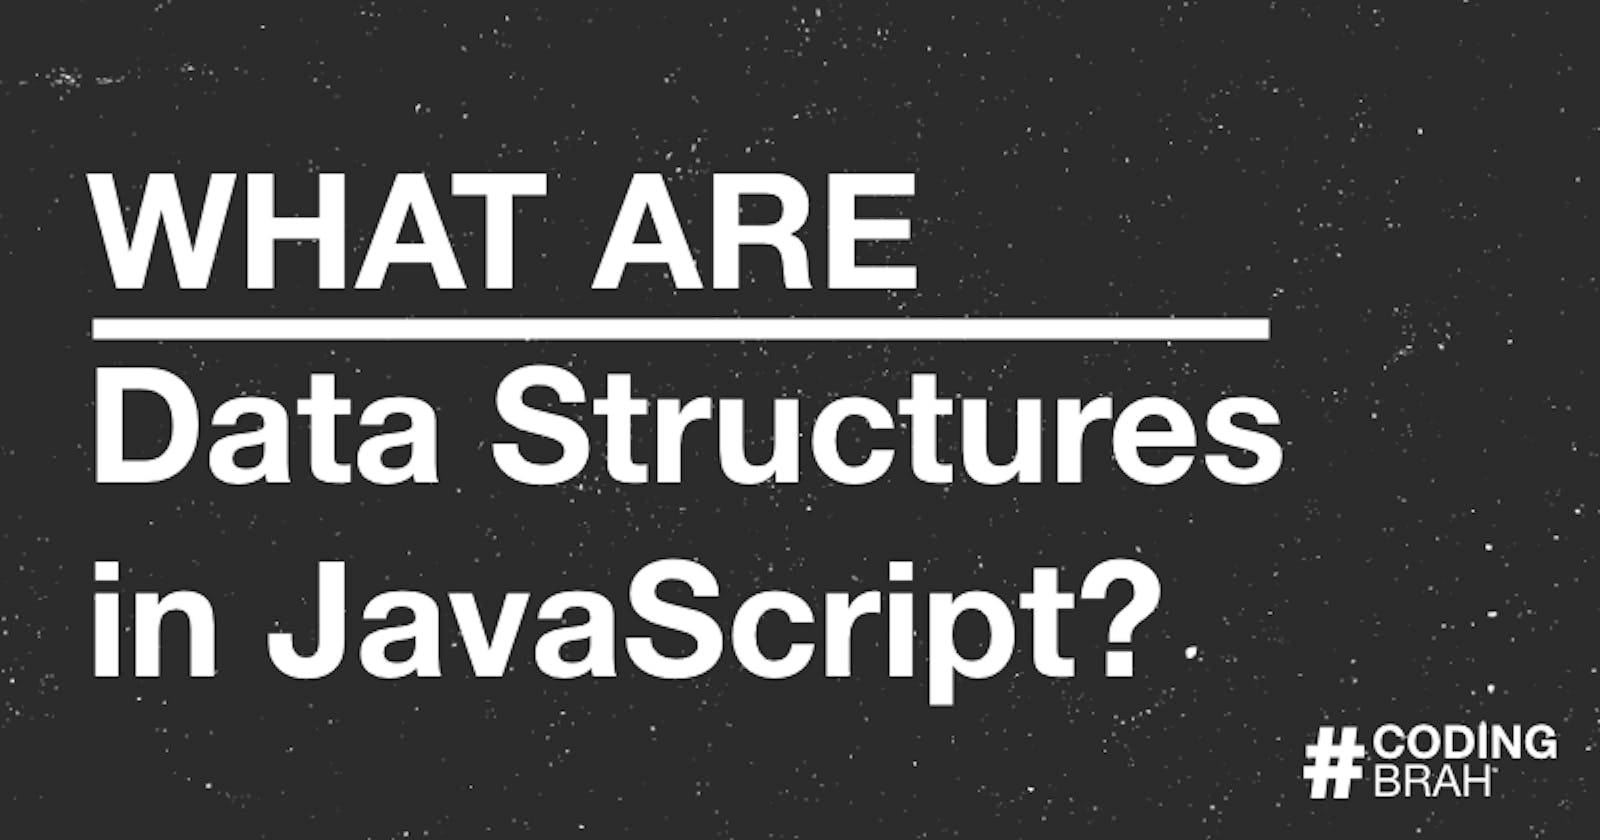 What are Data Structures in JavaScript?